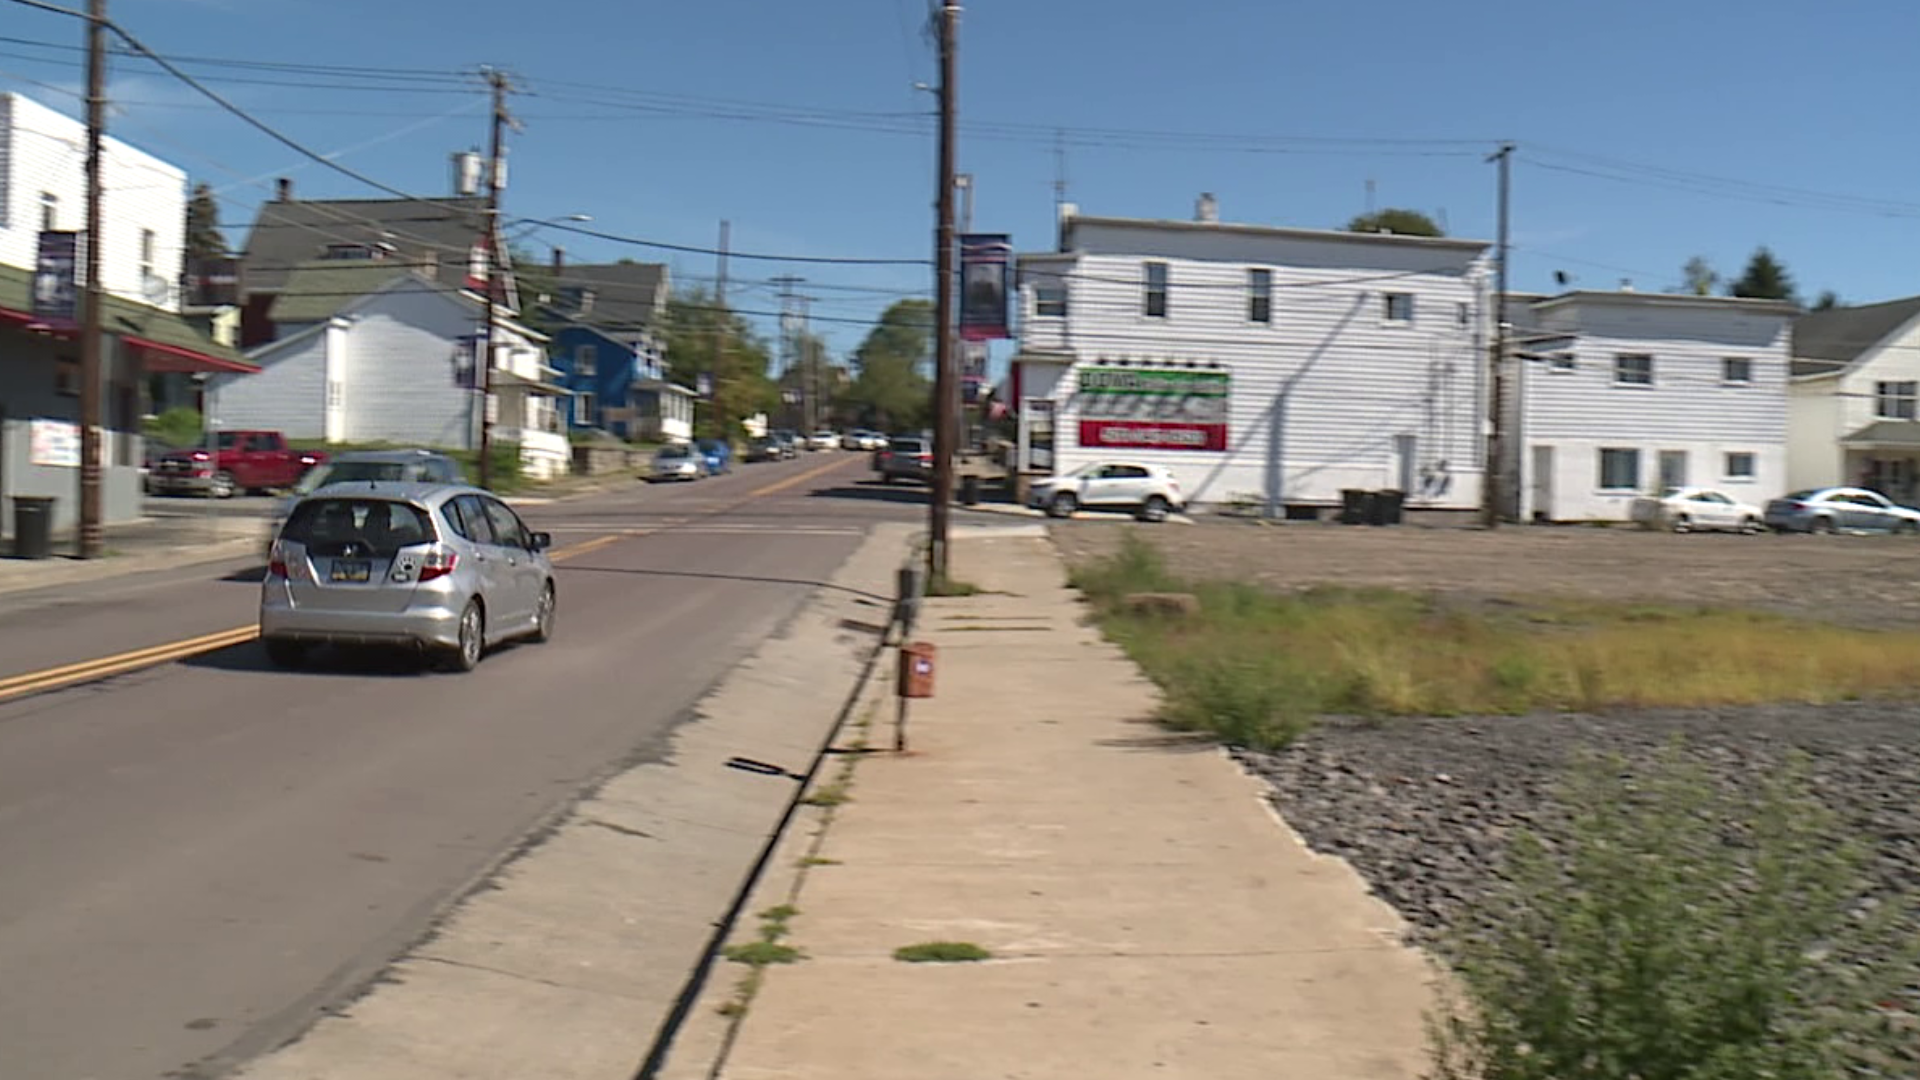 The borough of Dunmore, and its famous "corners" right in the middle of town, may soon be home to close to 100 people.